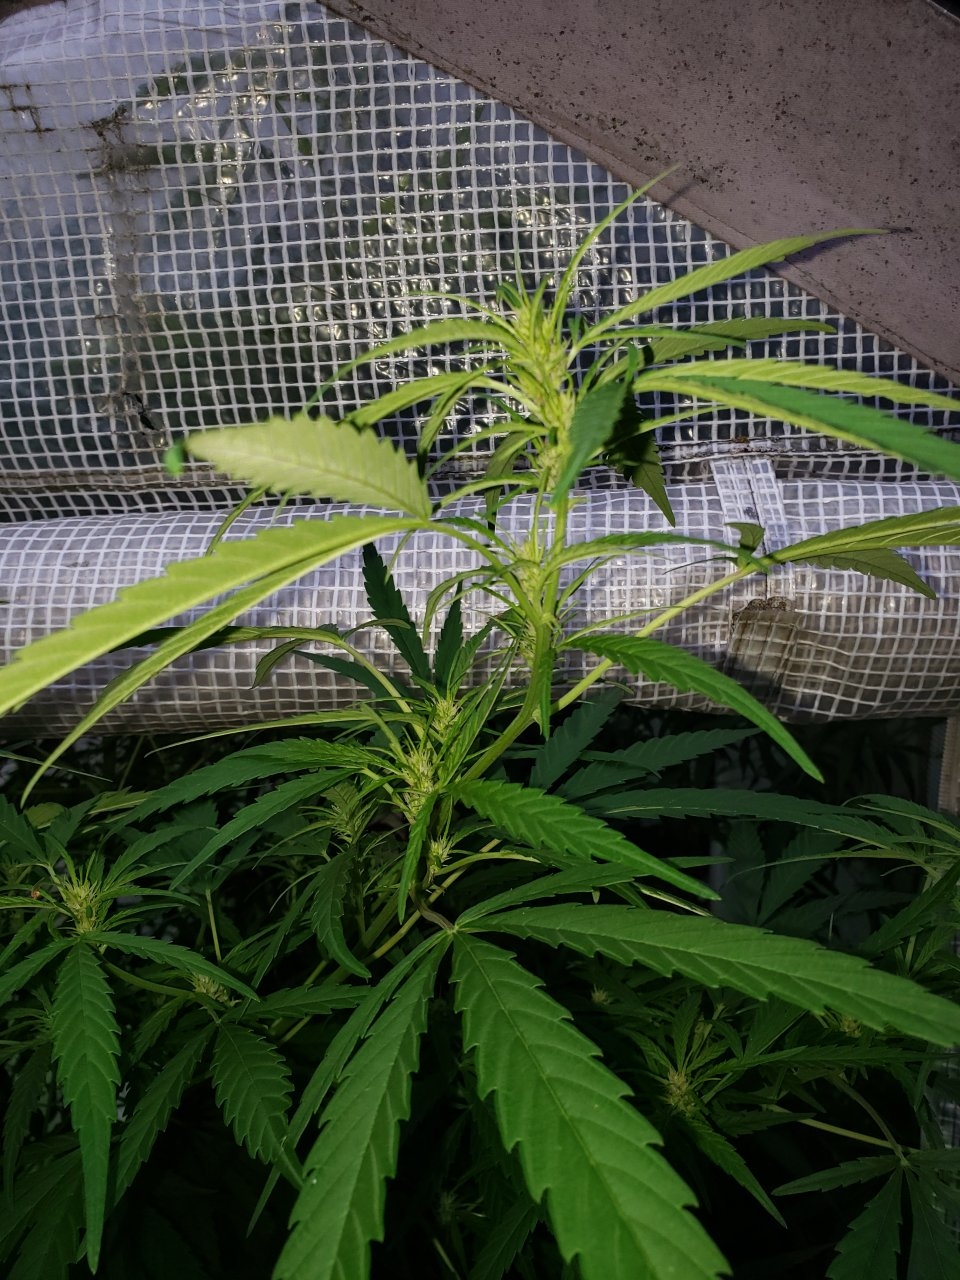 Outdoor Afrodite starting to flower